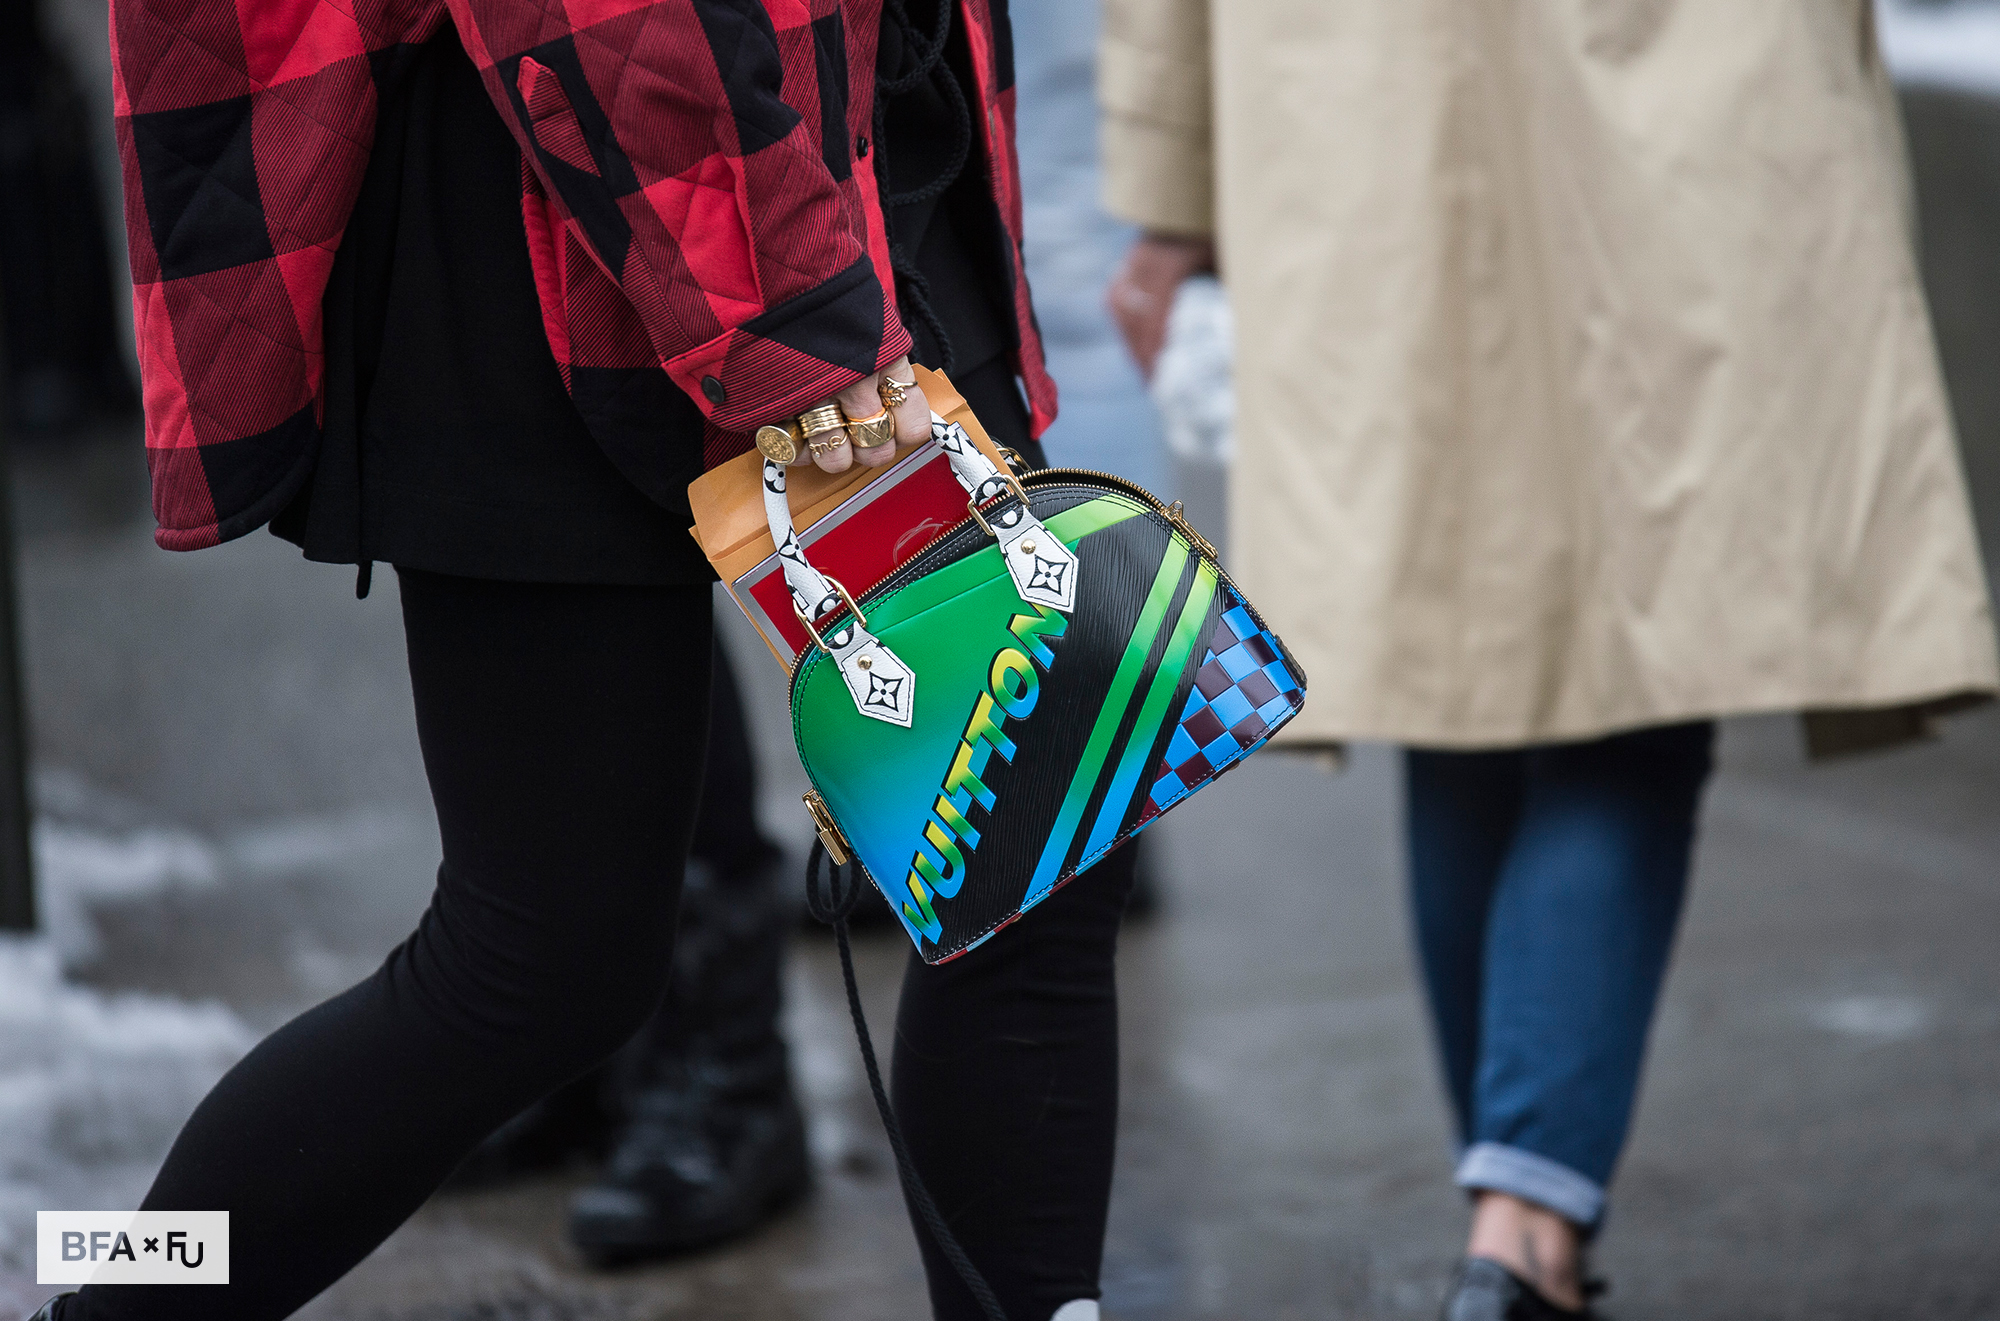 40 of the Best Street Style Moments From New York and London - Fashion ...